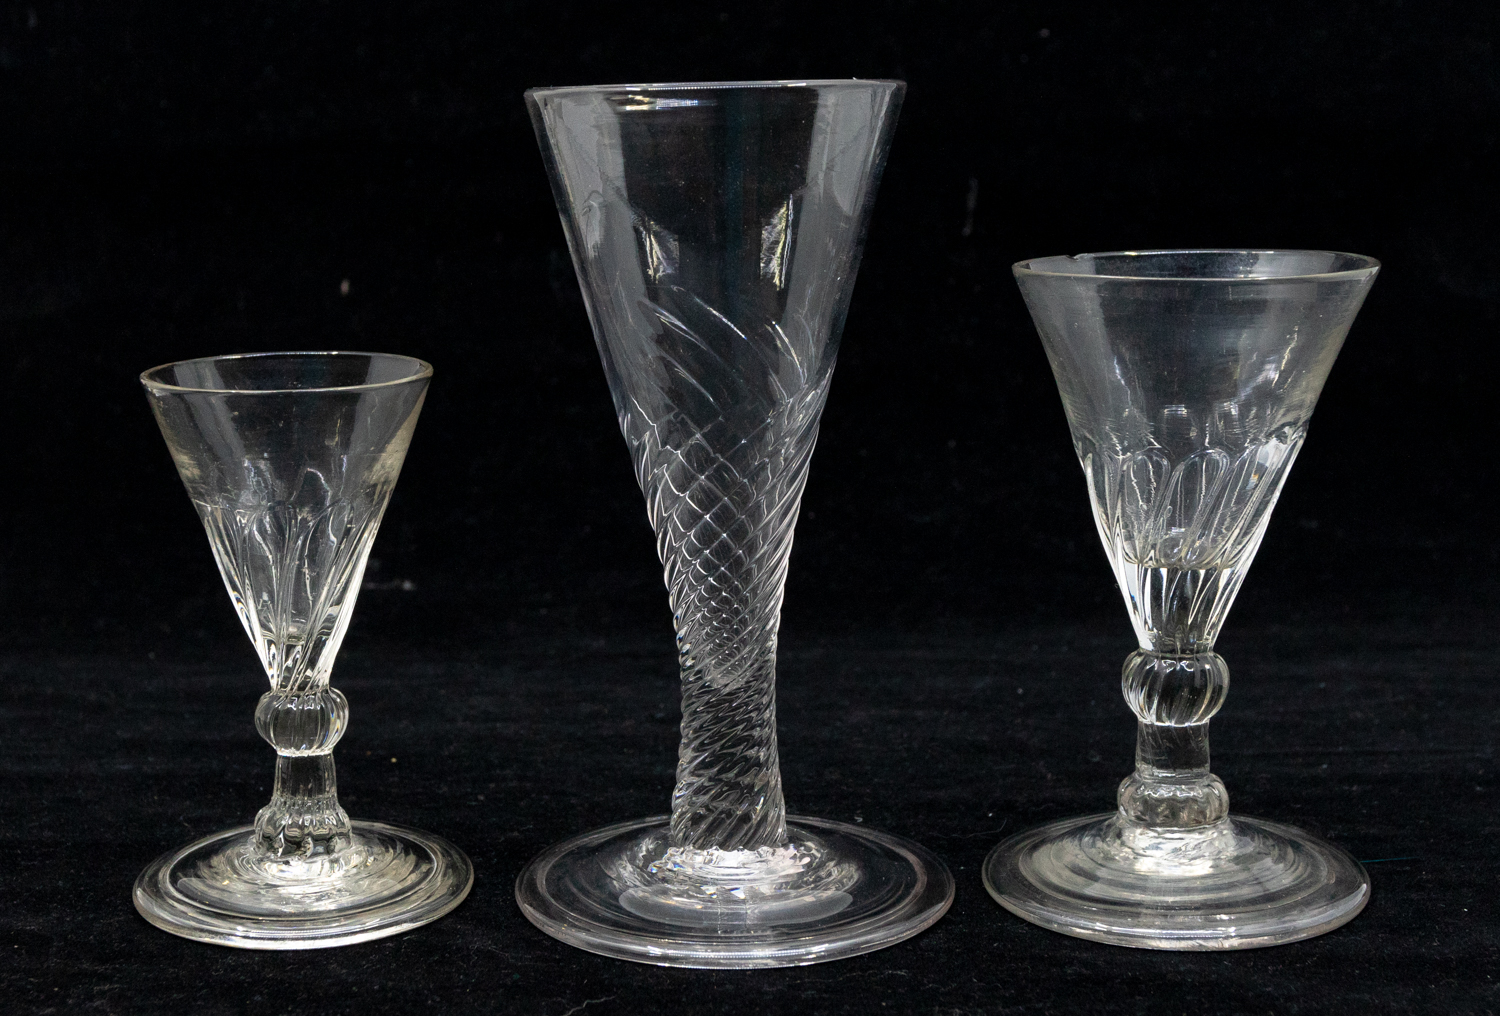 Three late 18th Century cordial glasses, twist stems, funnel bowls on round bases. - Image 3 of 5